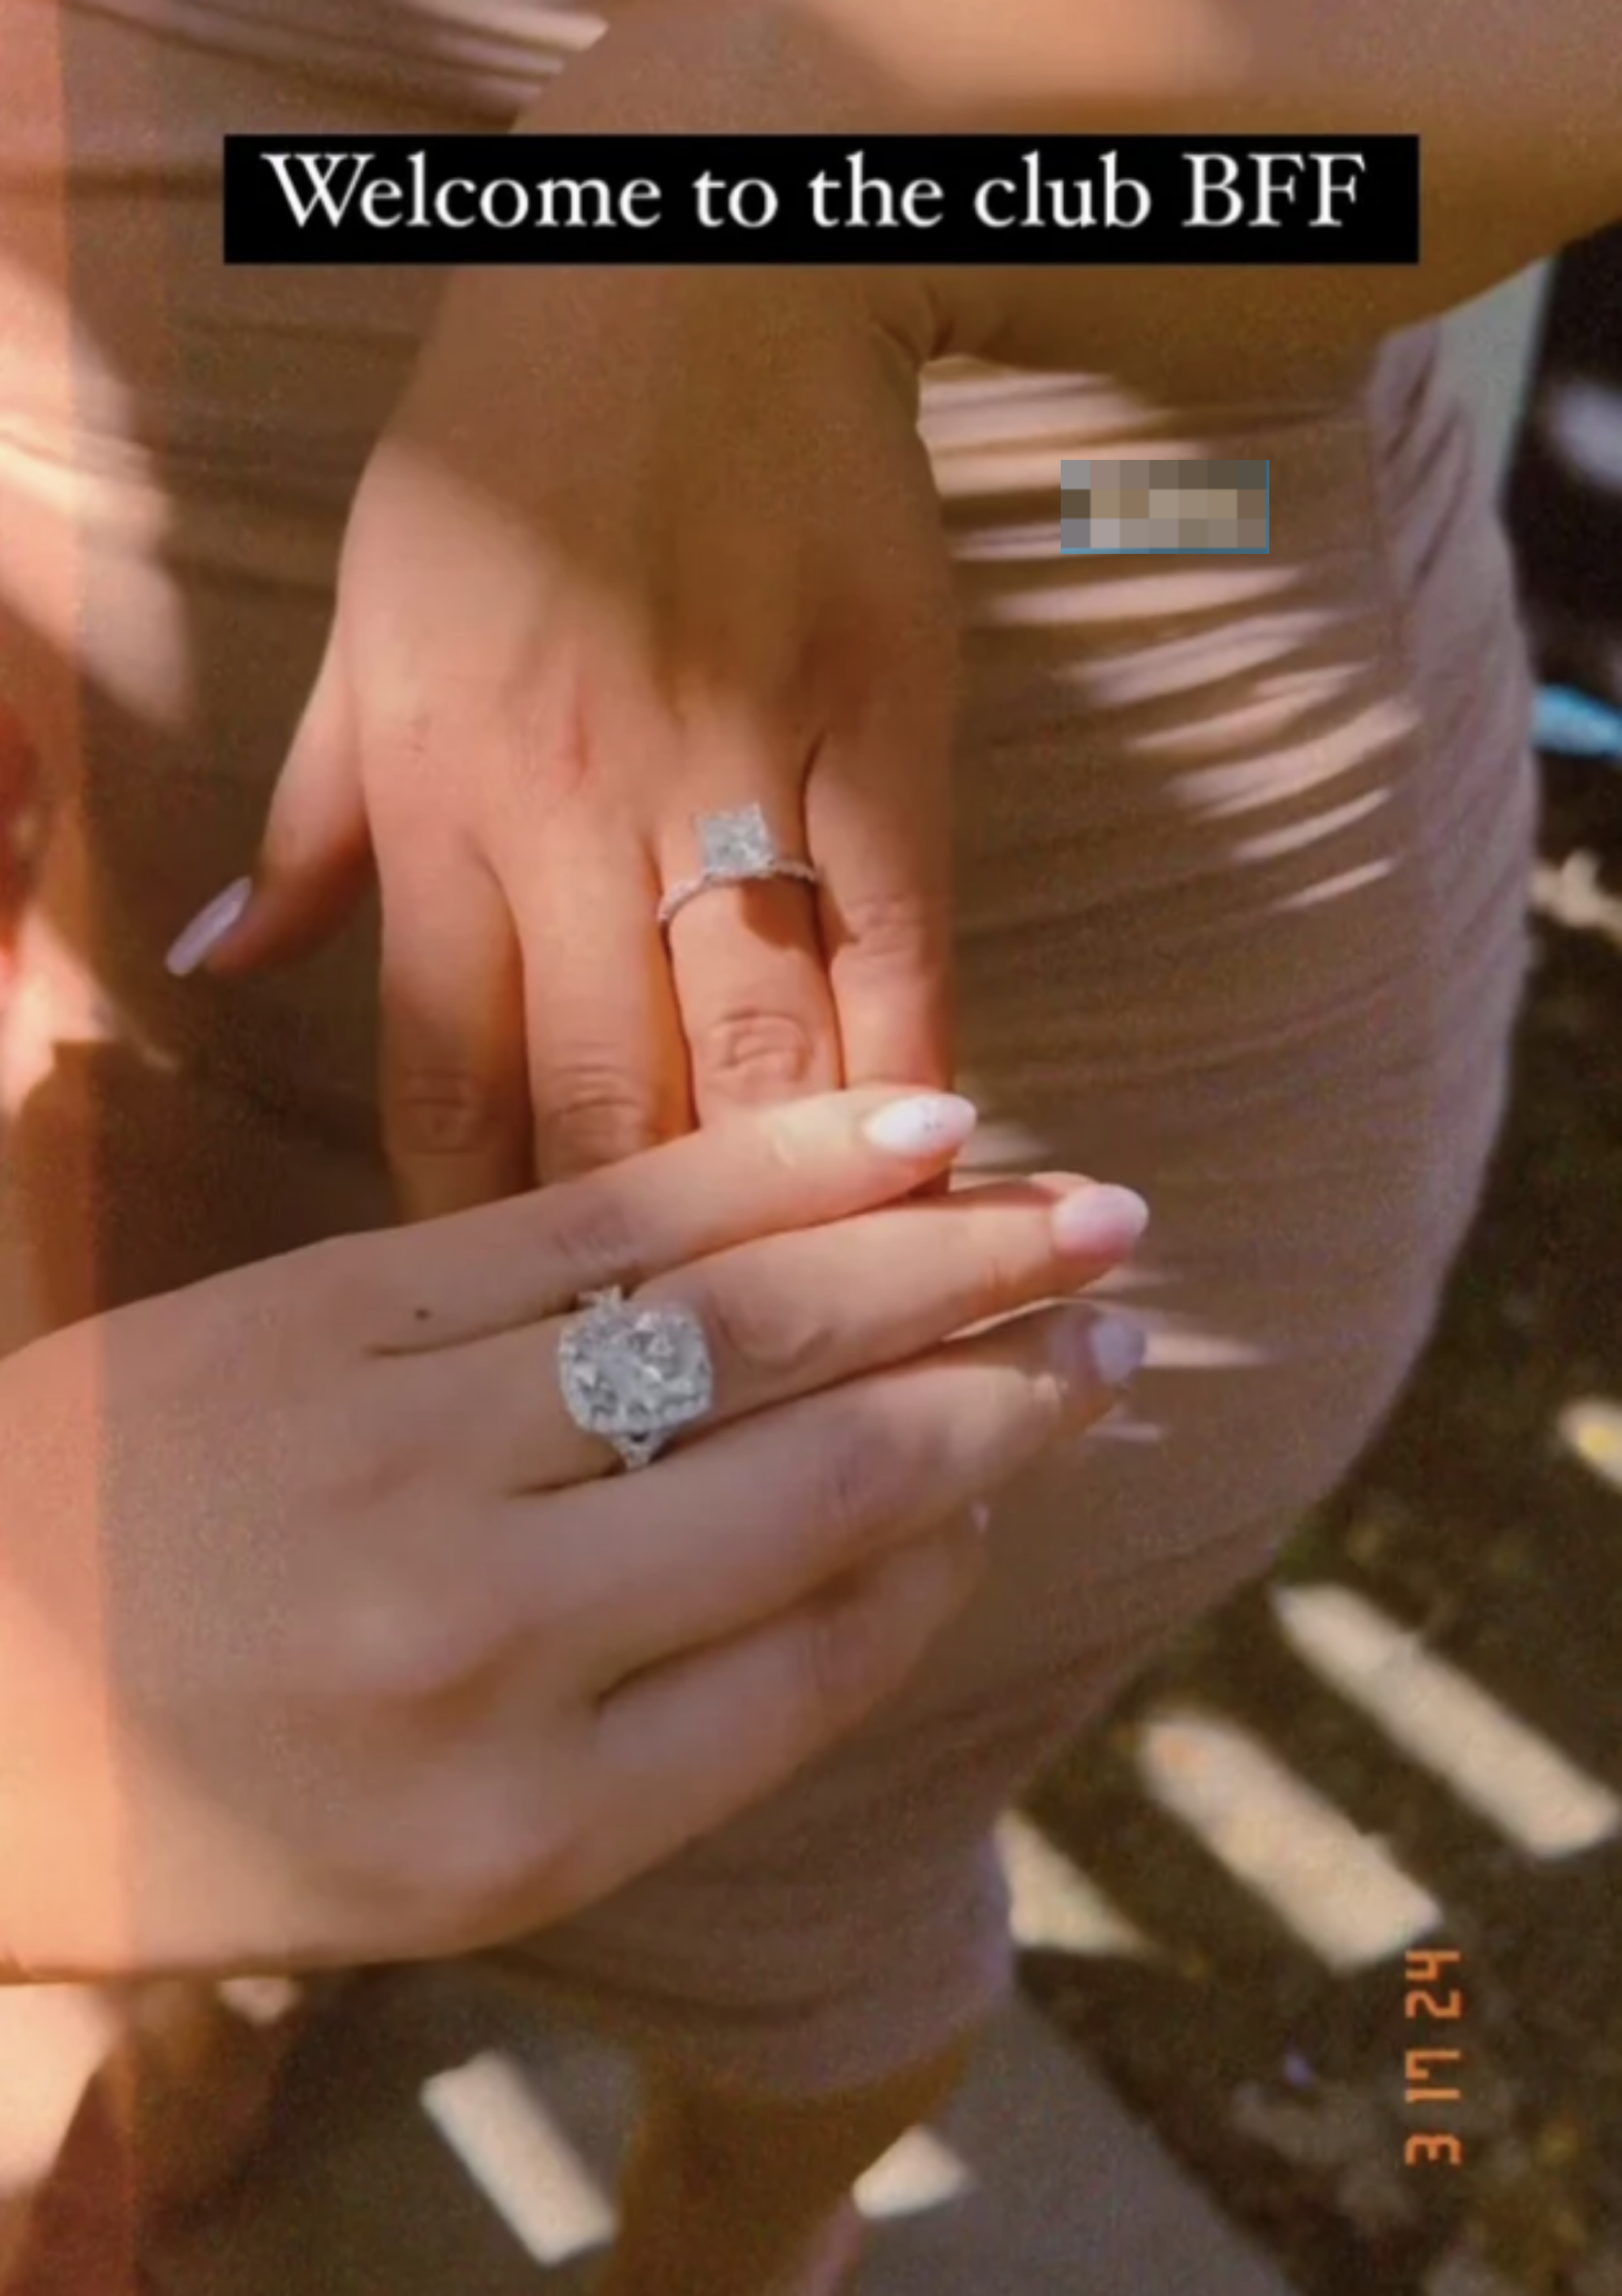 Two hands with diamond rings on ring fingers, text overlay reads &quot;Welcome to the club BFF&quot;